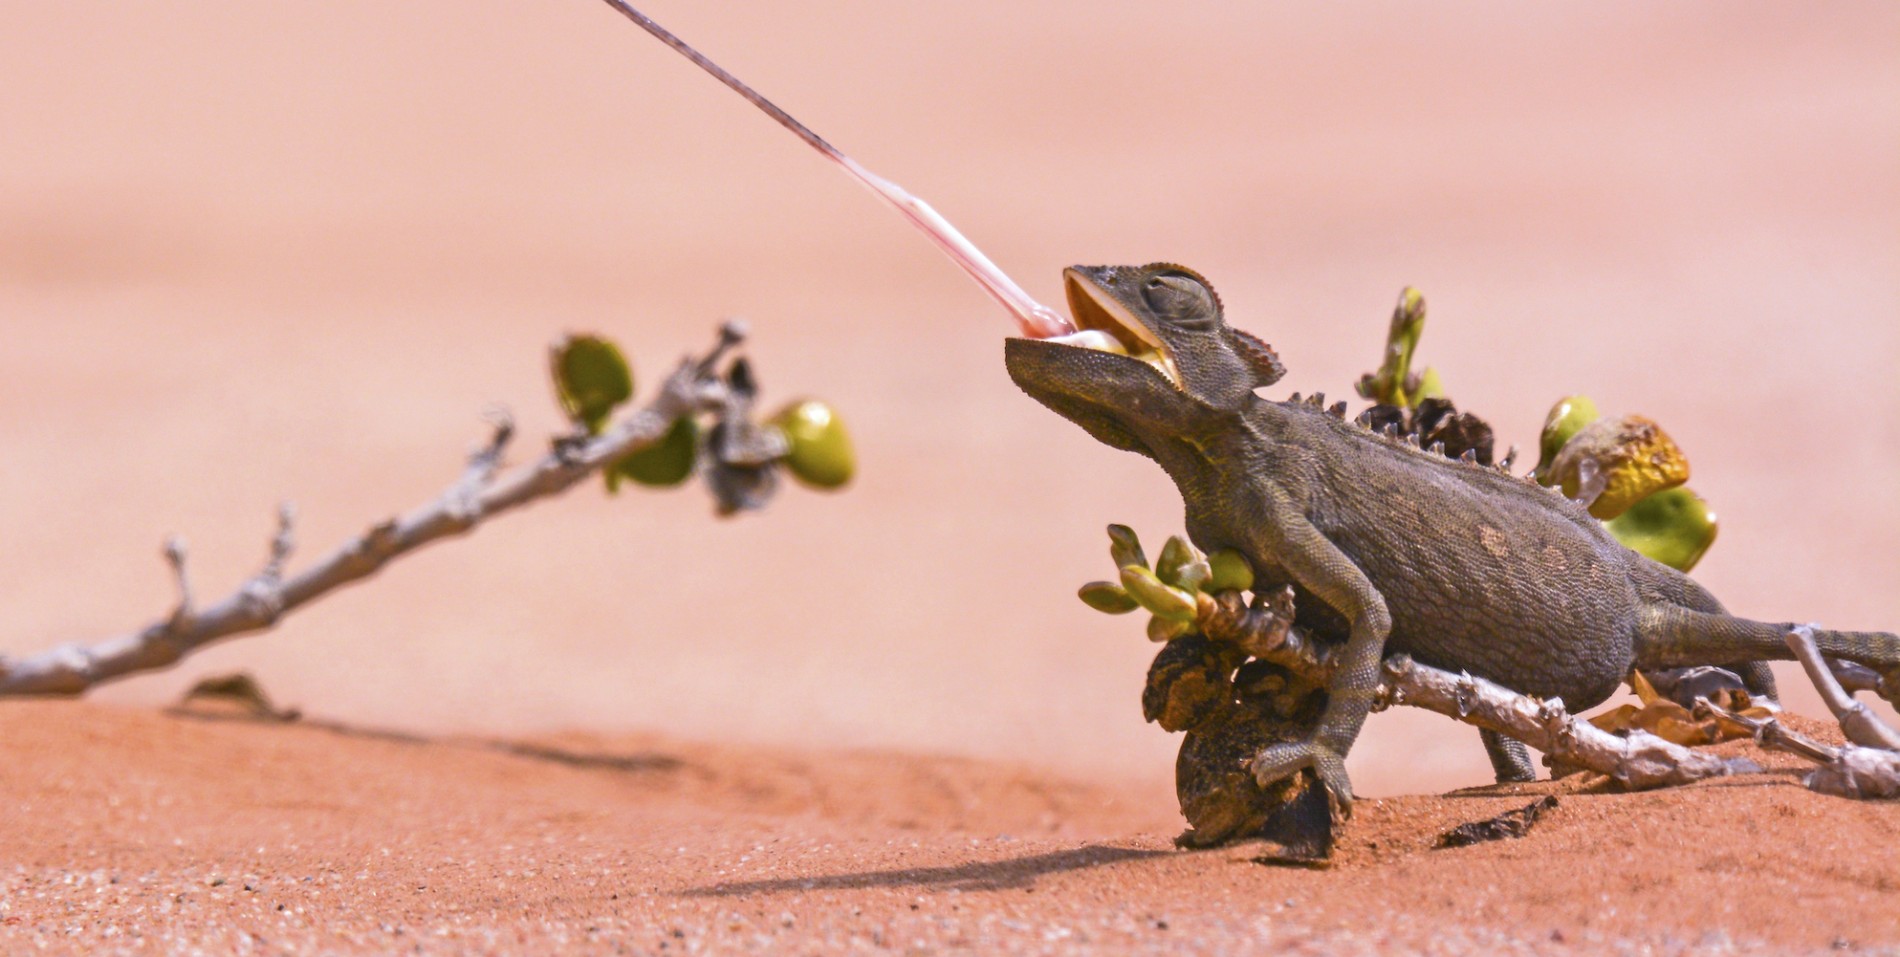 Close up of a desert chameleon on red sand with its tongue out 